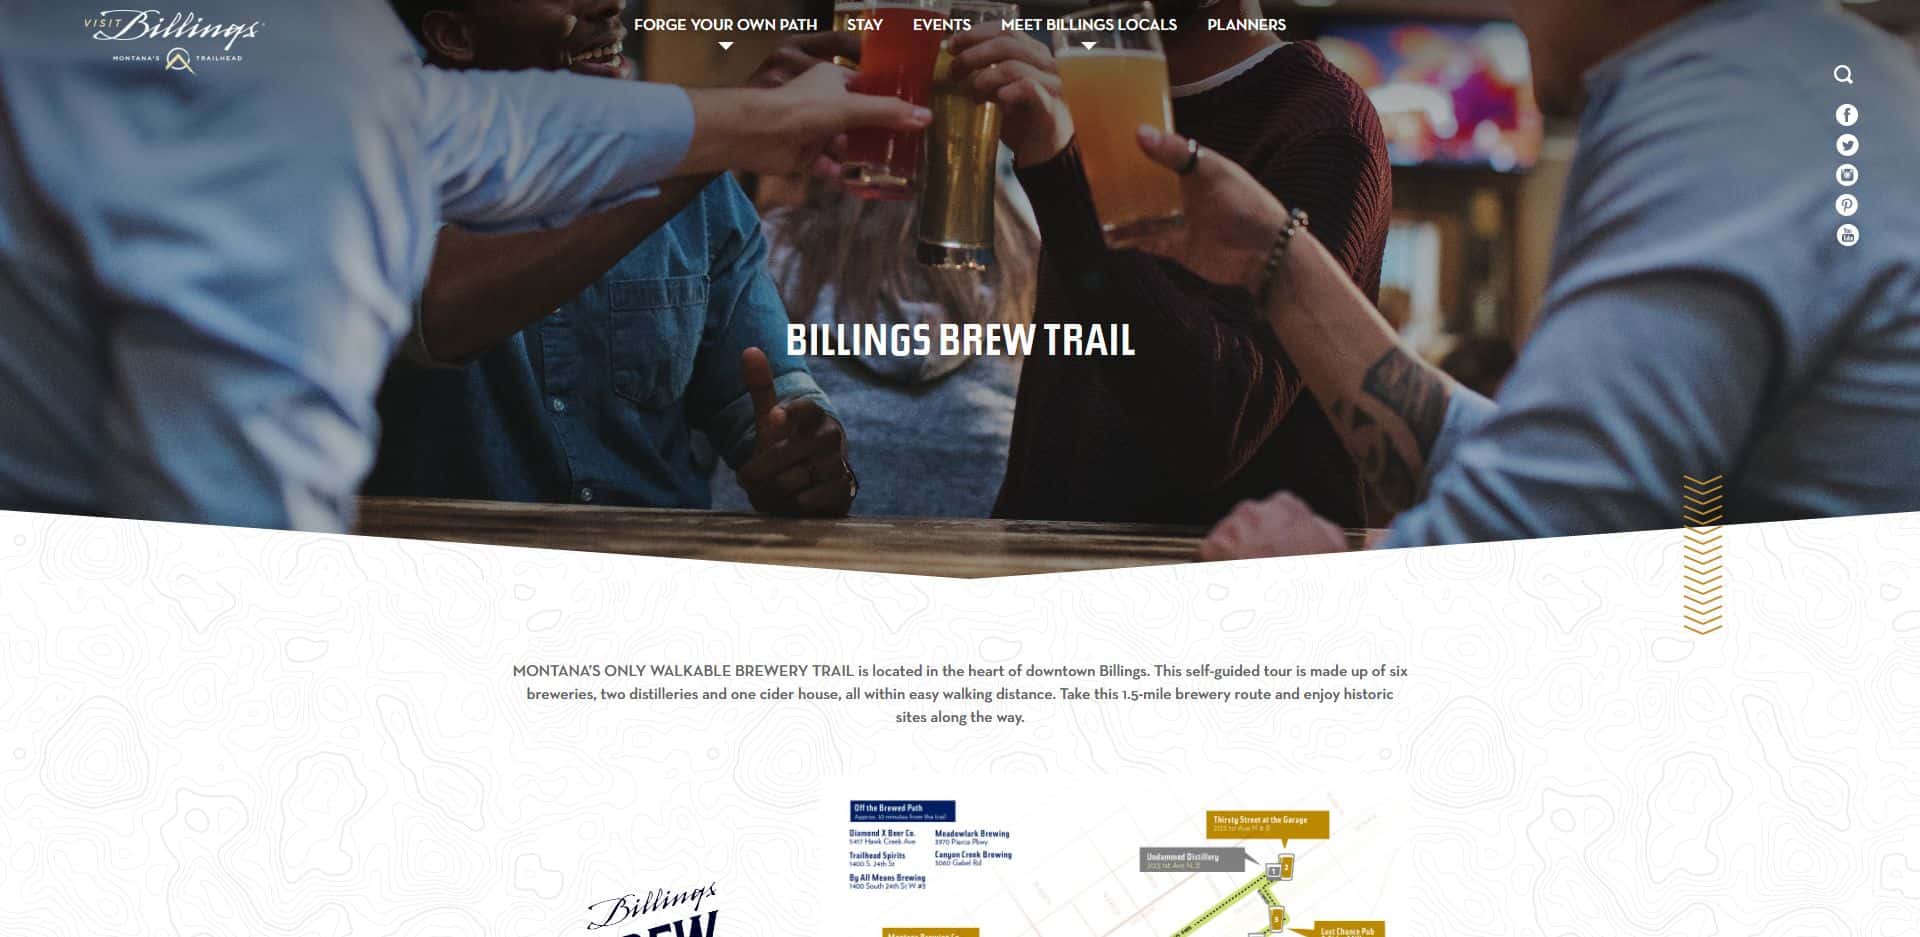 The Billings Brew Trail is a great way to explore Montana's Trailhead